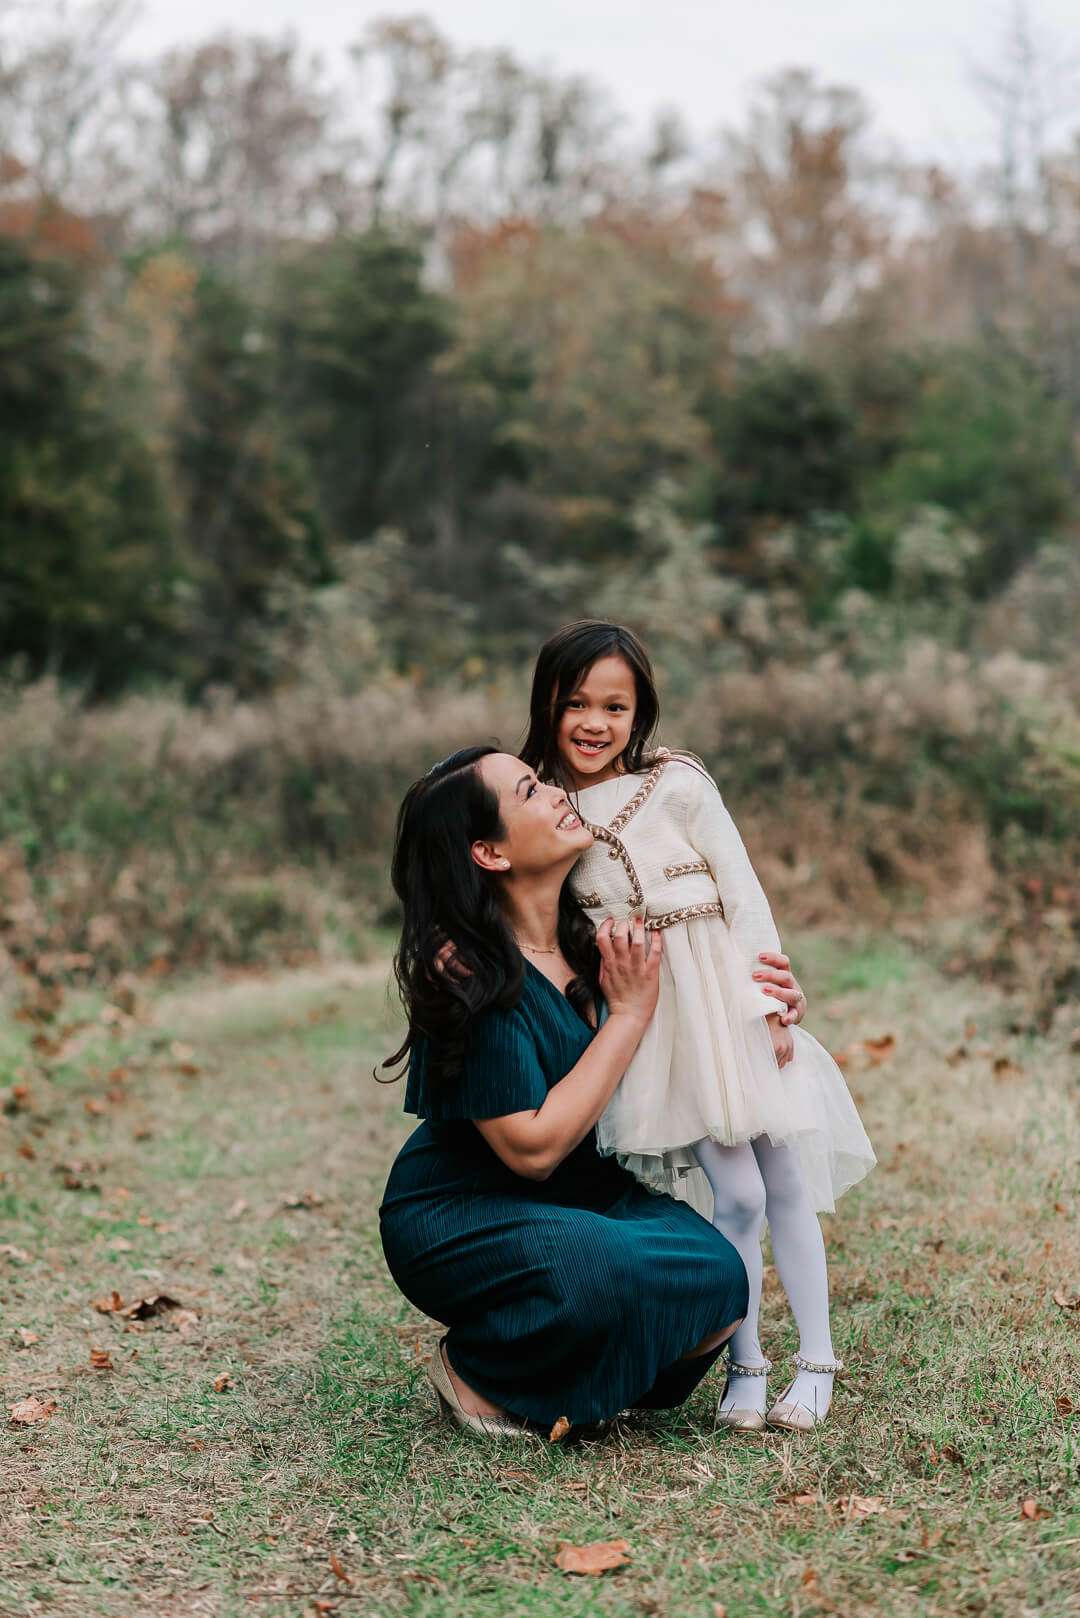 A happy mother sits squats to hug her young daughter in a park after meeting an annandale obgyn